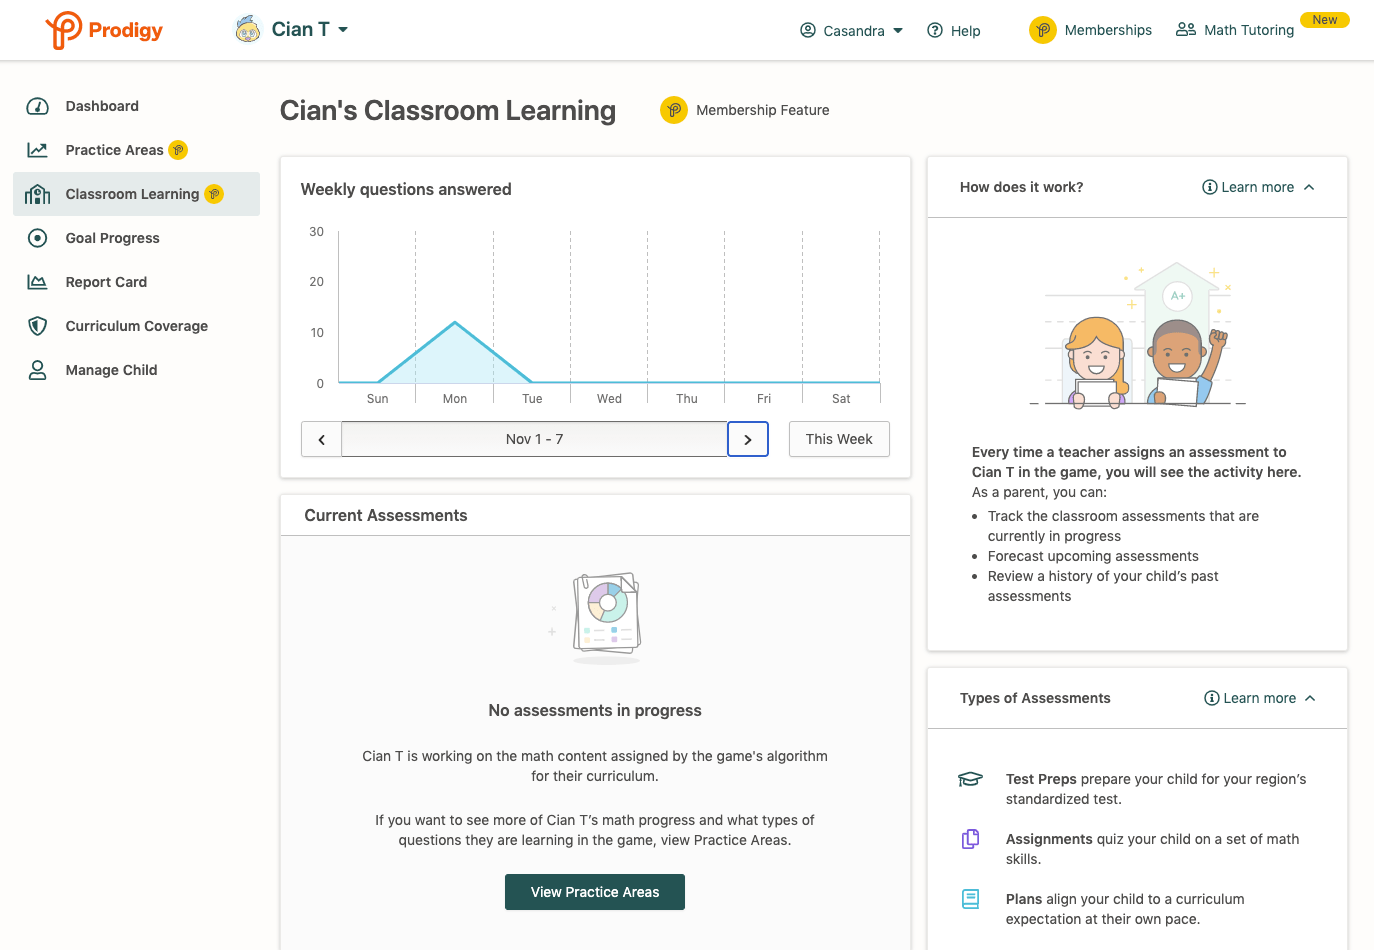 Screenshot of Prodigy's Classroom Learning feature in the parent dashboard.